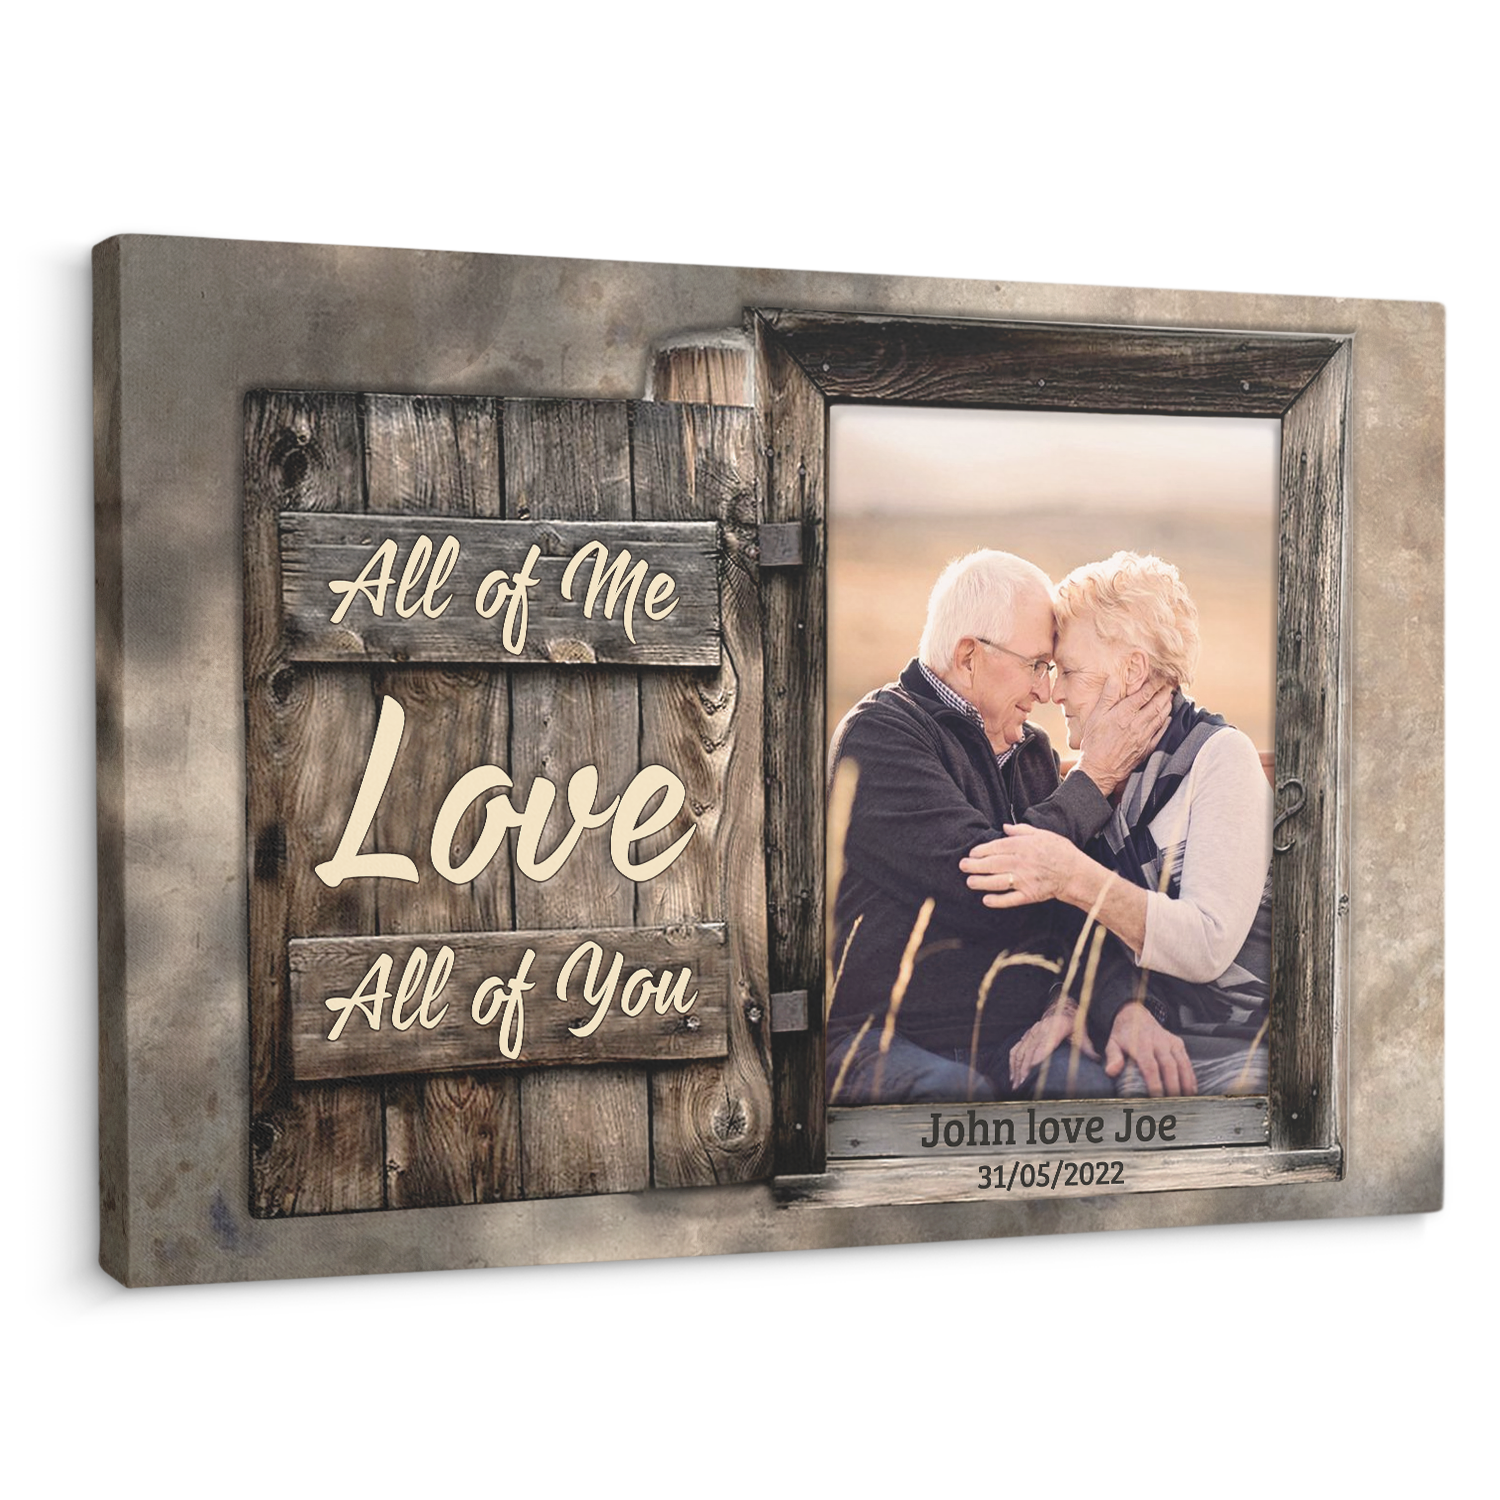 All Of Me Love All Of You, Custom Photo, Canvas Wall Art